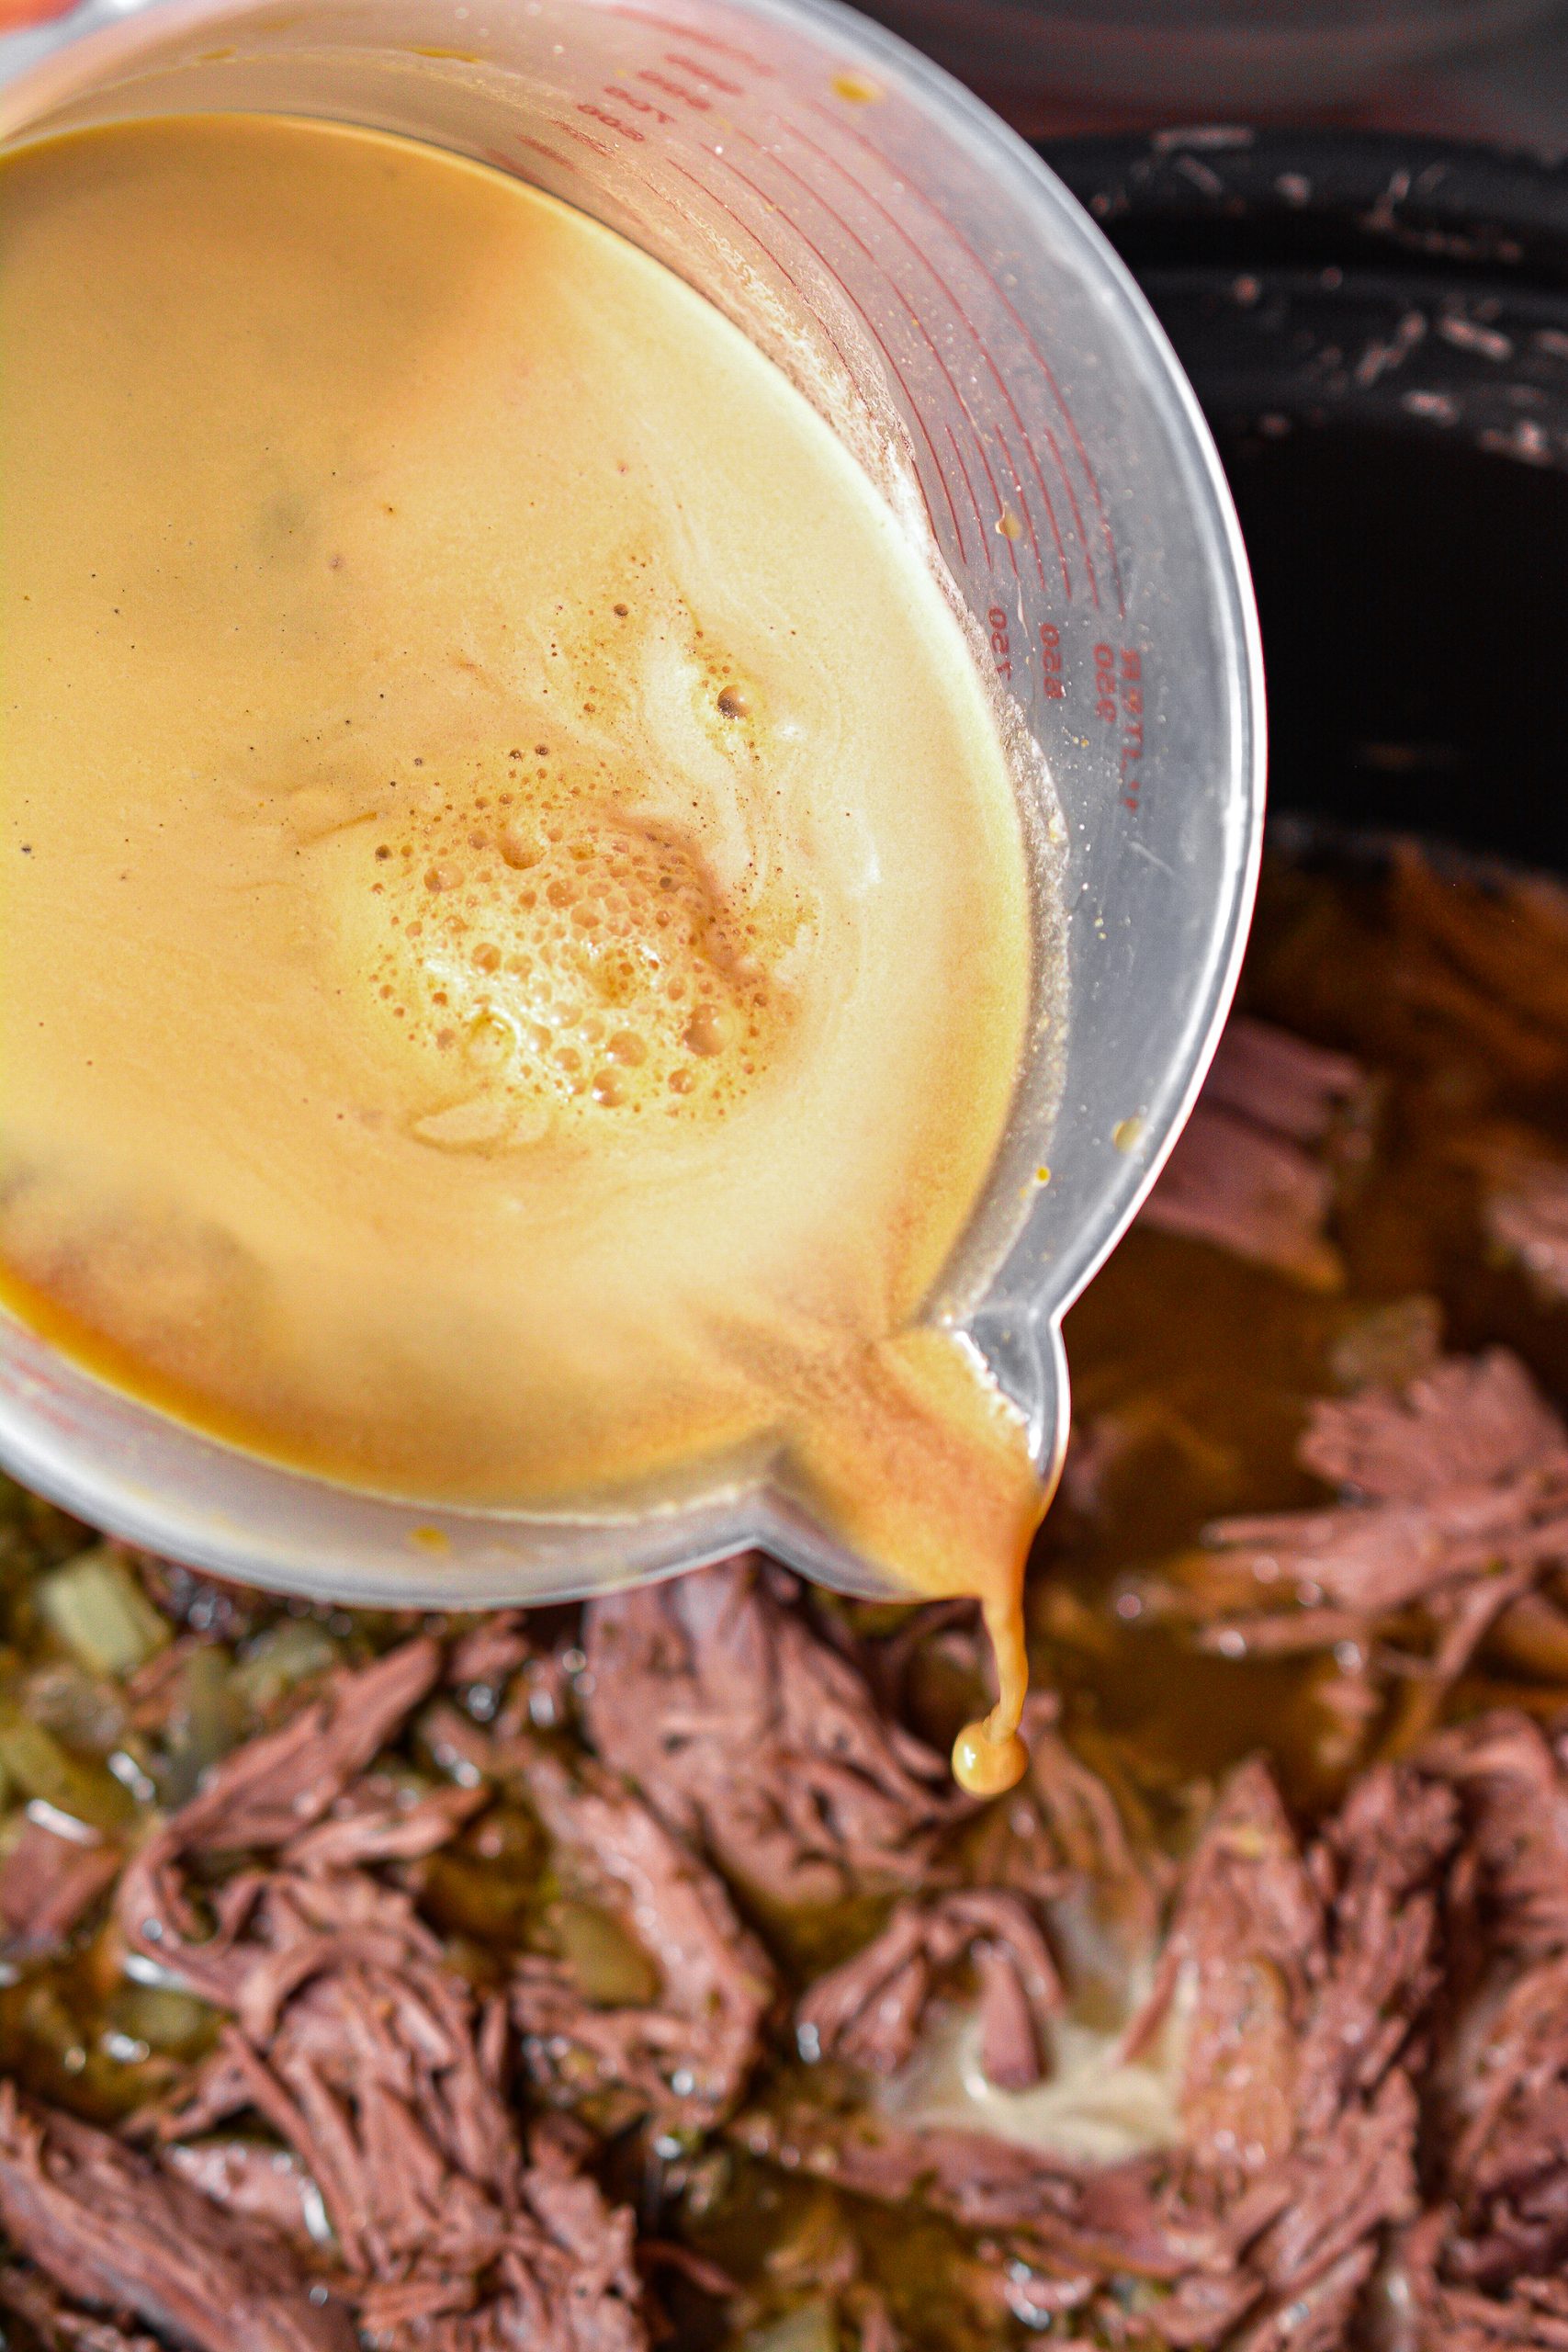 Pour the gravy into the Crockpot, replace the lid and cook on low for an additional hour.